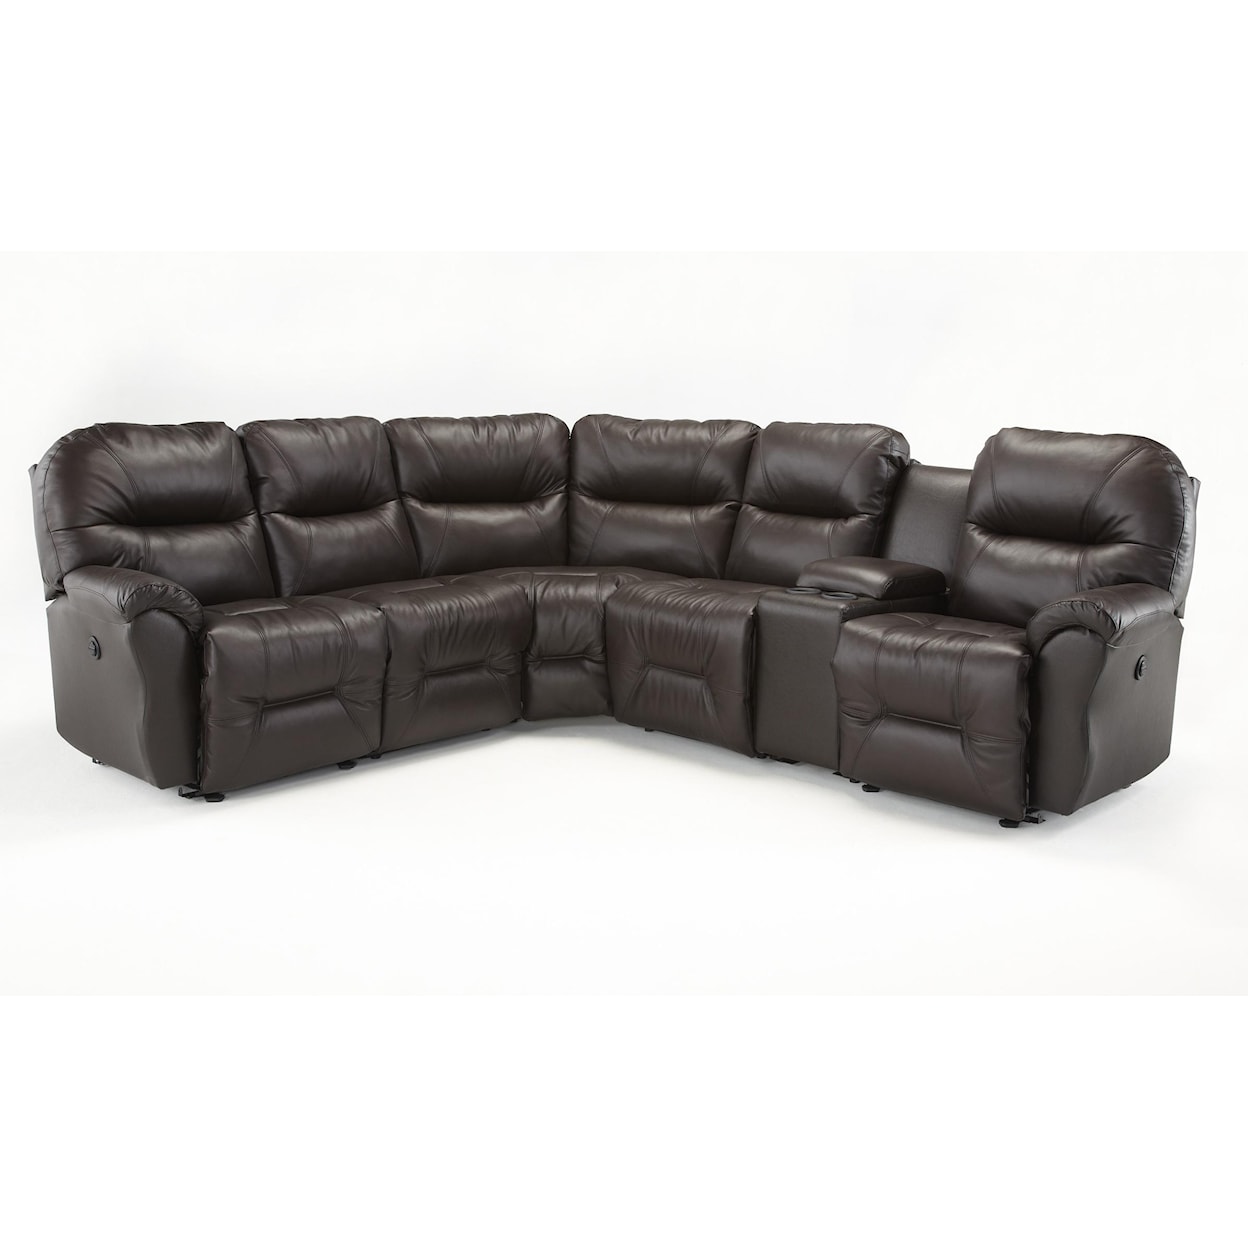 Best Home Furnishings Allure Collection 6 Pc Power Reclining Sectional Sofa